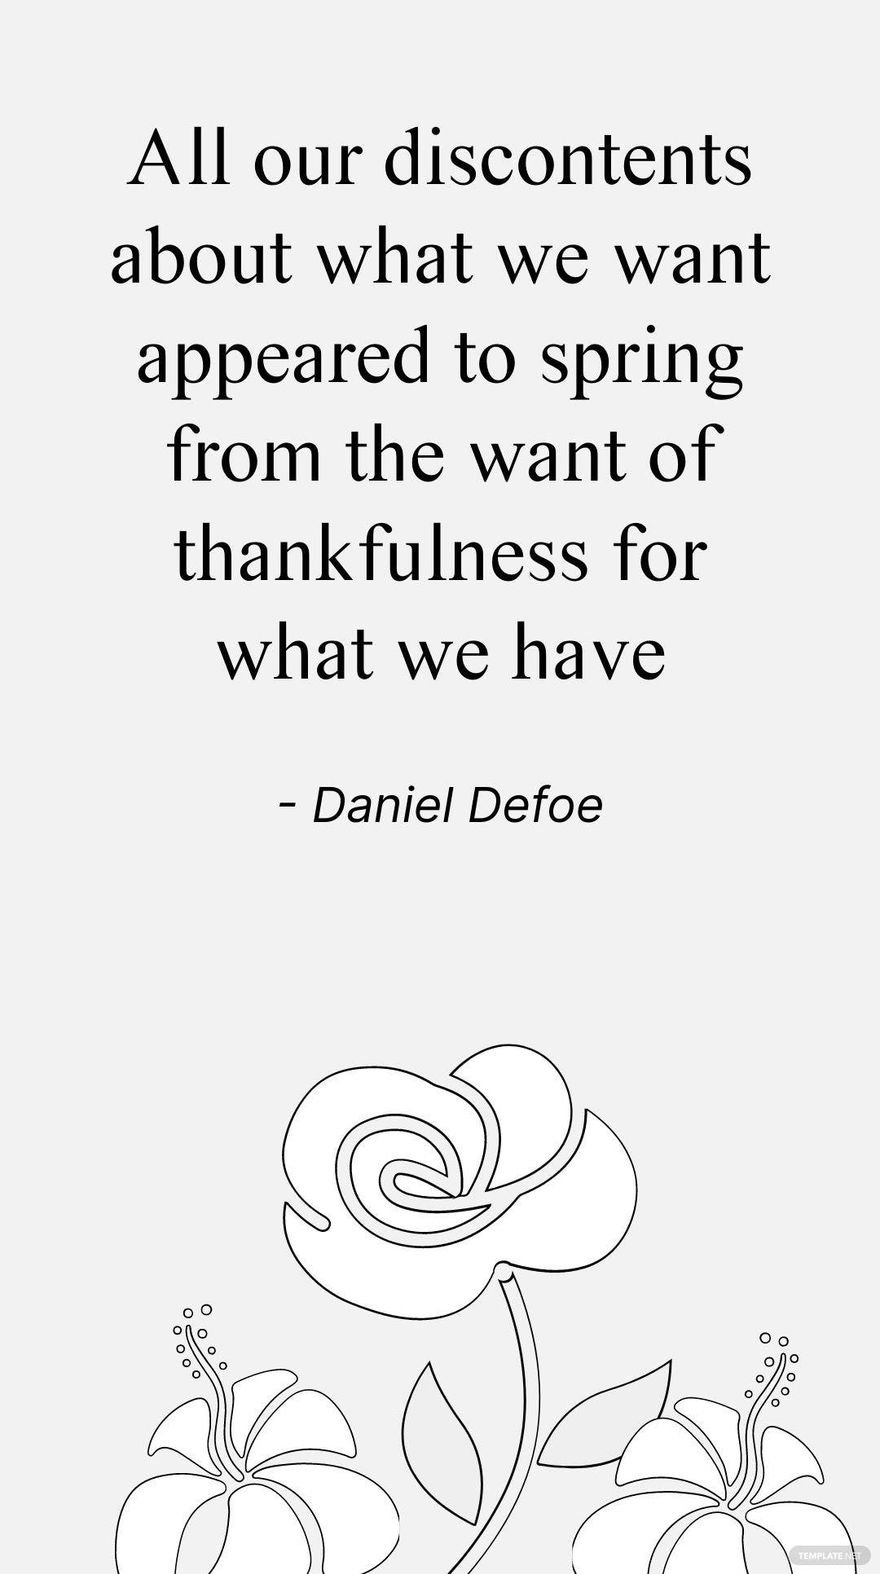 Daniel Defoe - All our discontents about what we want appeared to spring from the want of thankfulness for what we have